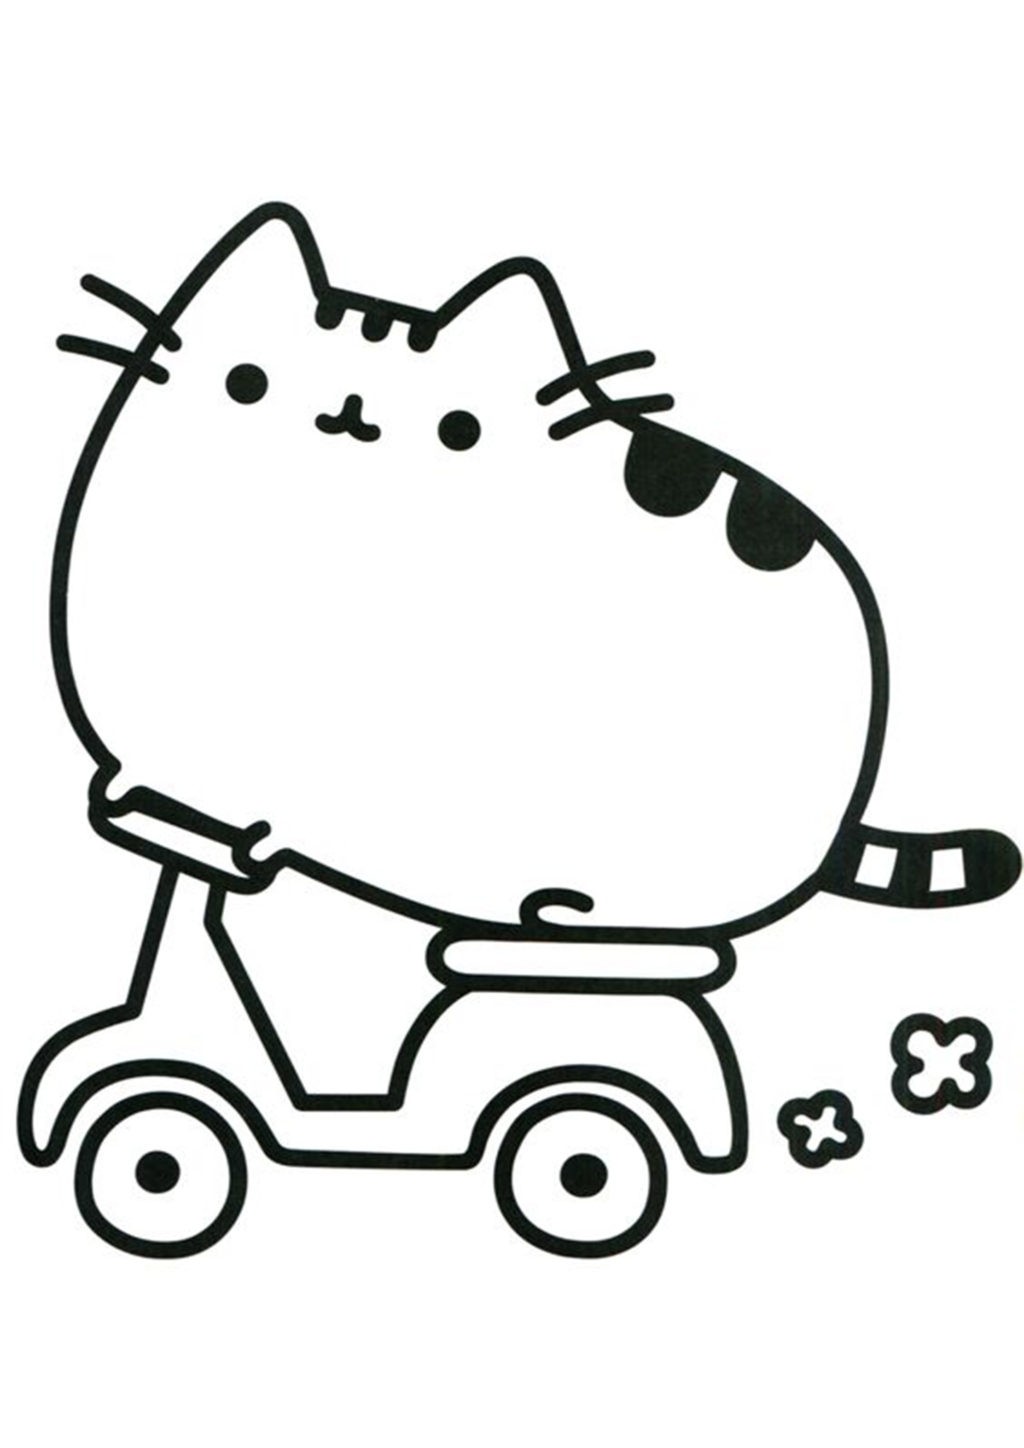 Pusheen Cat Coloring Pages   Coloring Home